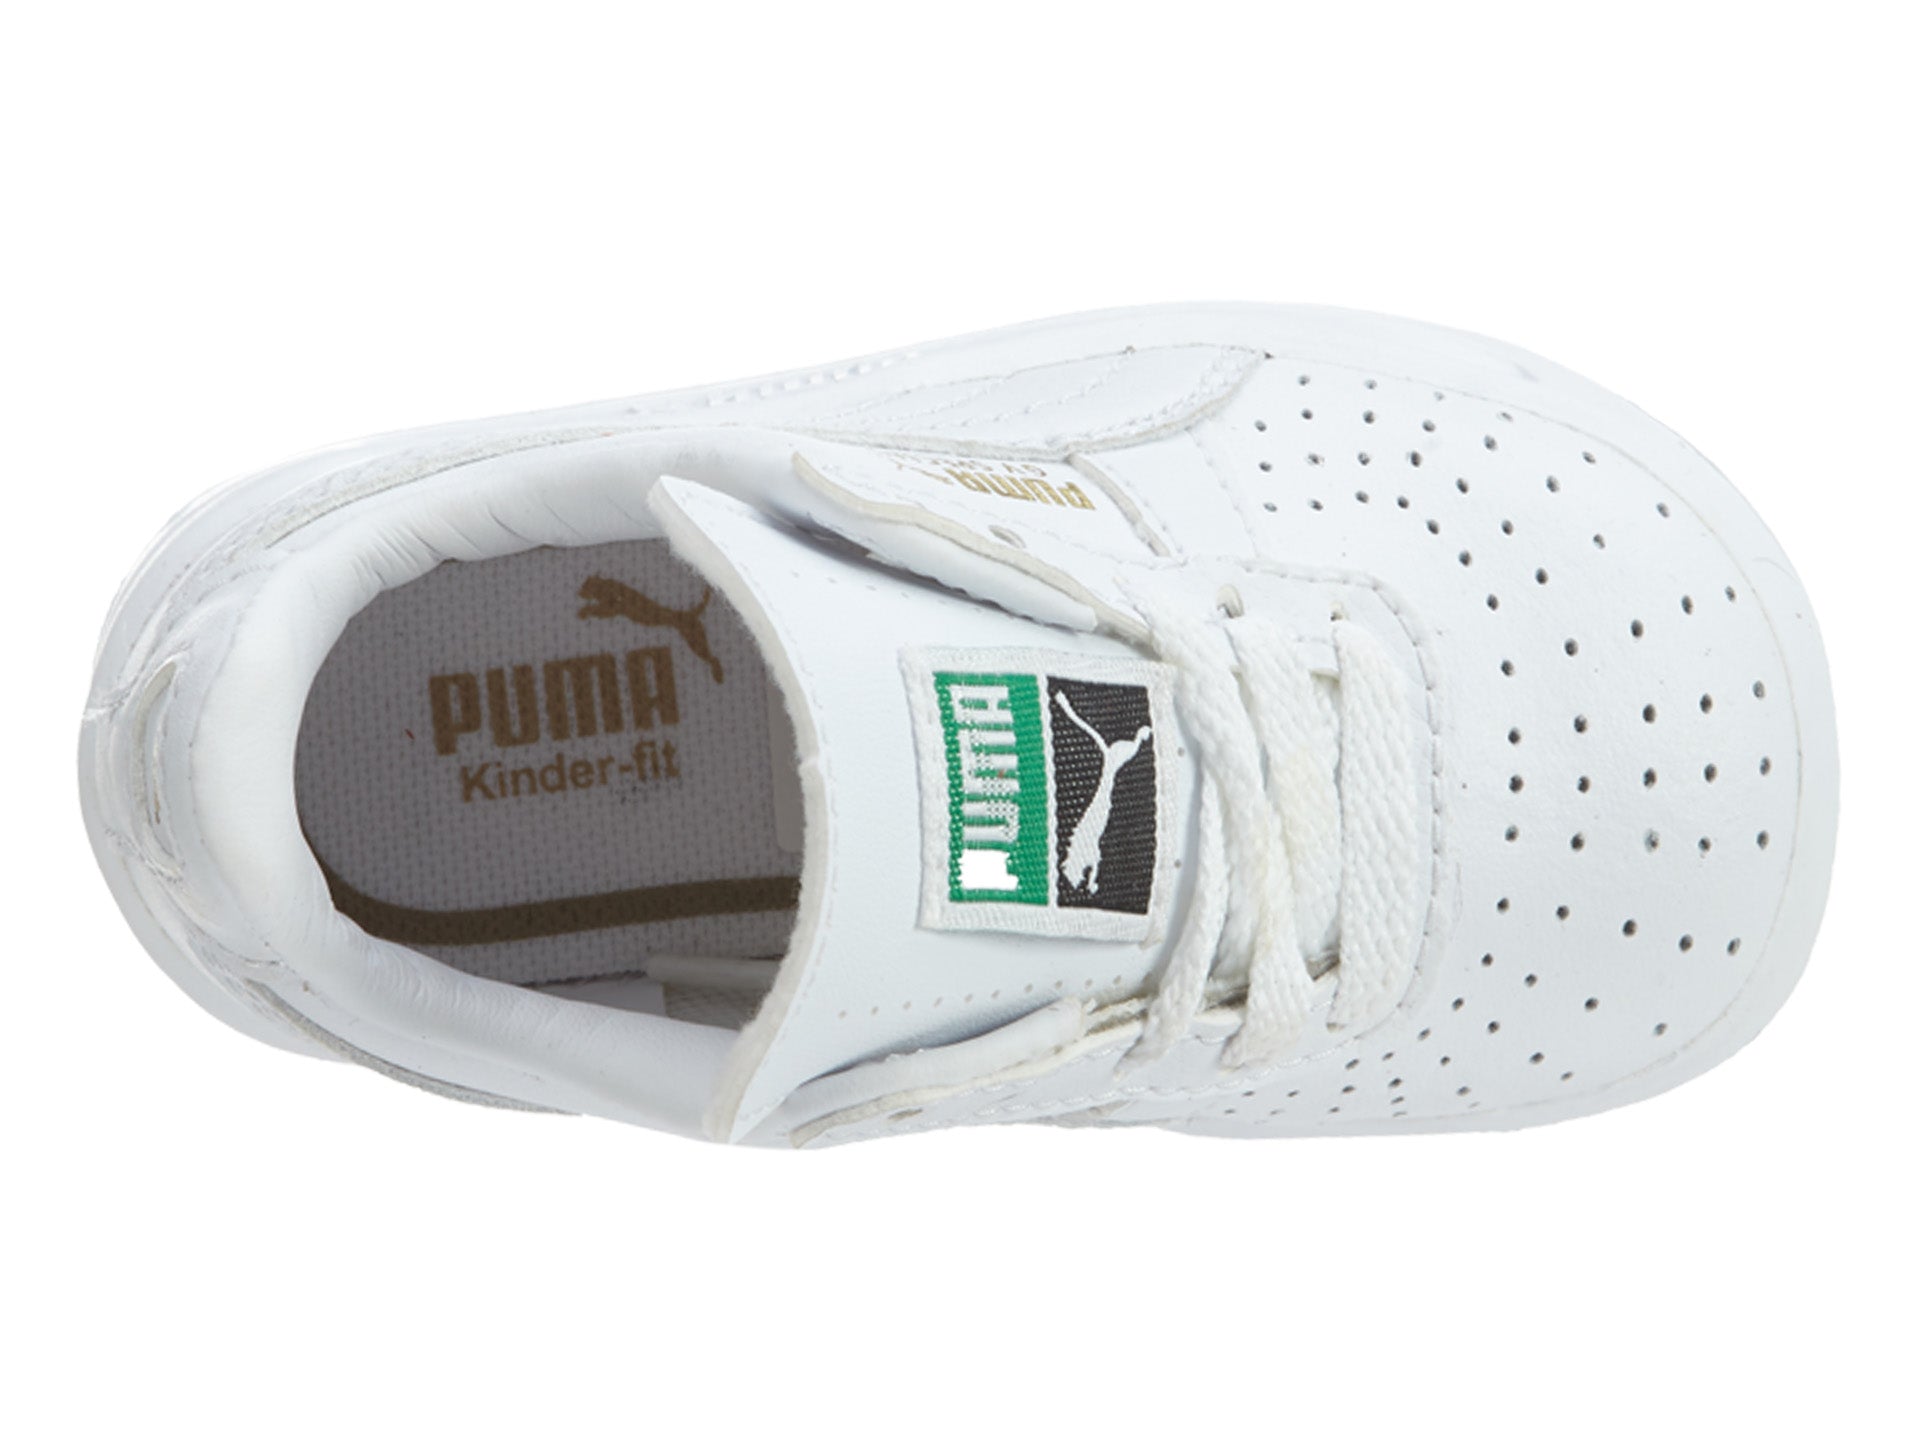 Puma Gv Special Little Kids Toddlers Style : 351721